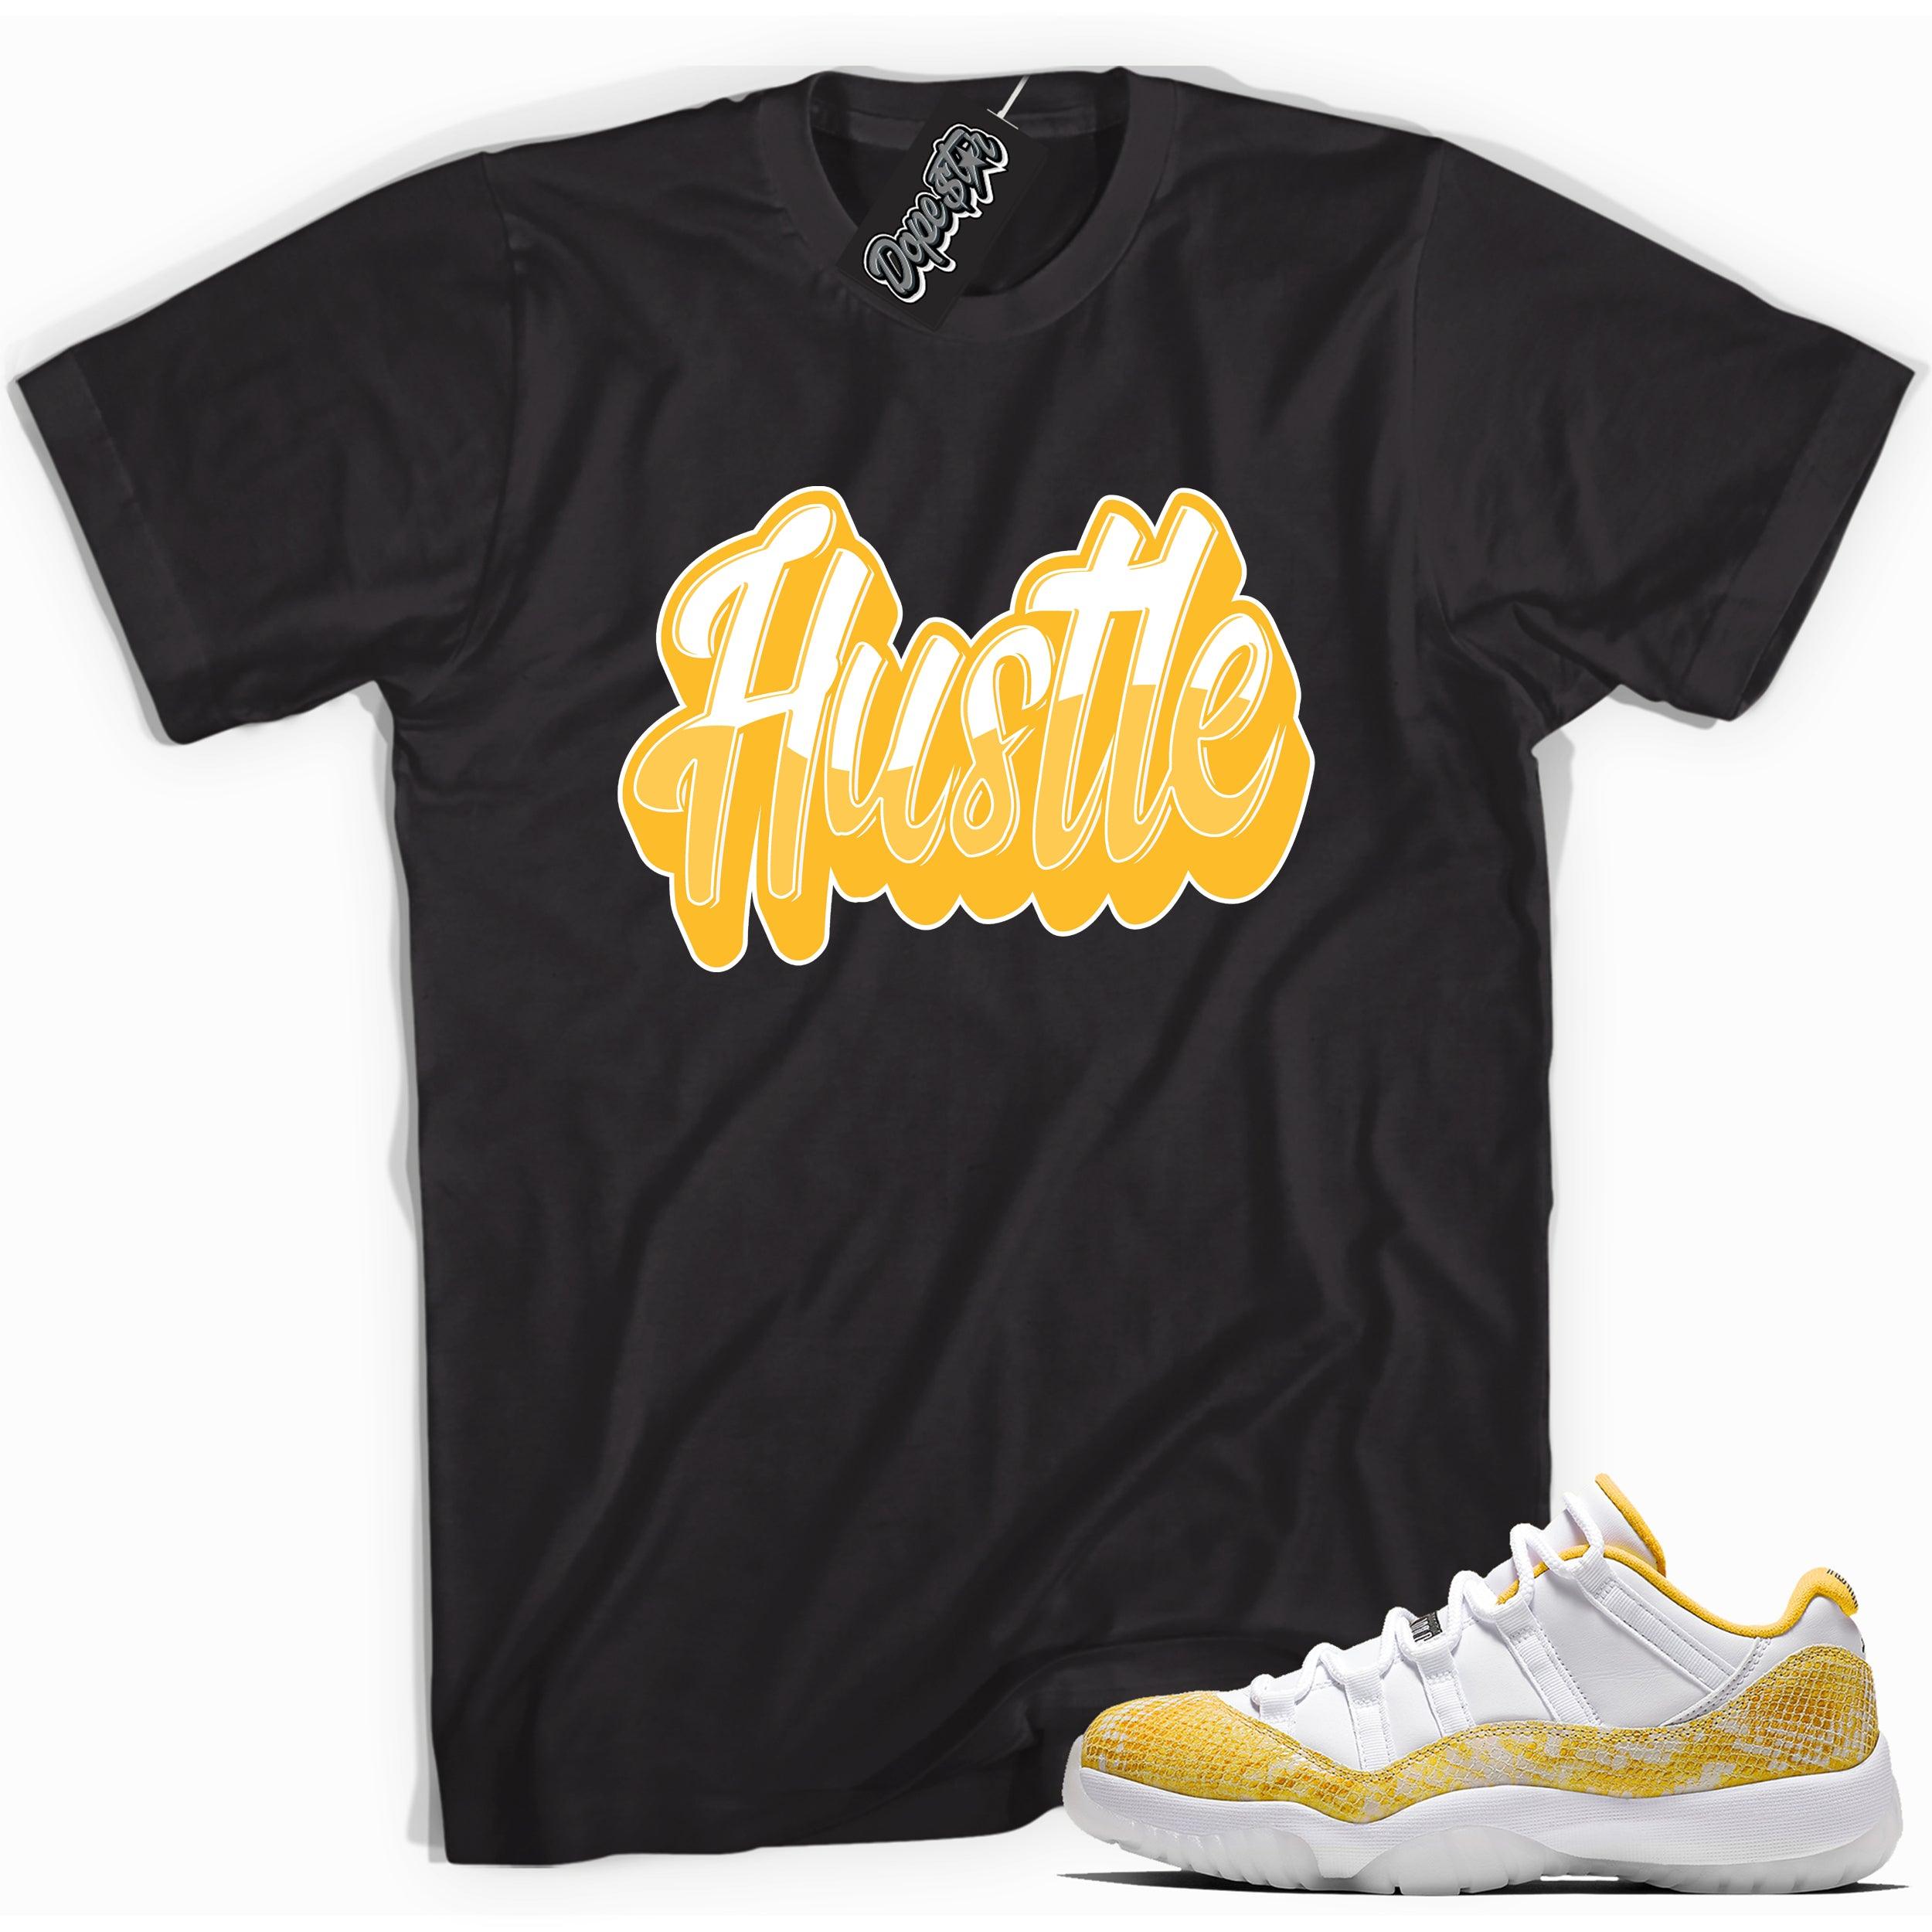 Cool black graphic tee with 'hustle' print, that perfectly matches  Air Jordan 11 Low Yellow Snakeskin sneakers